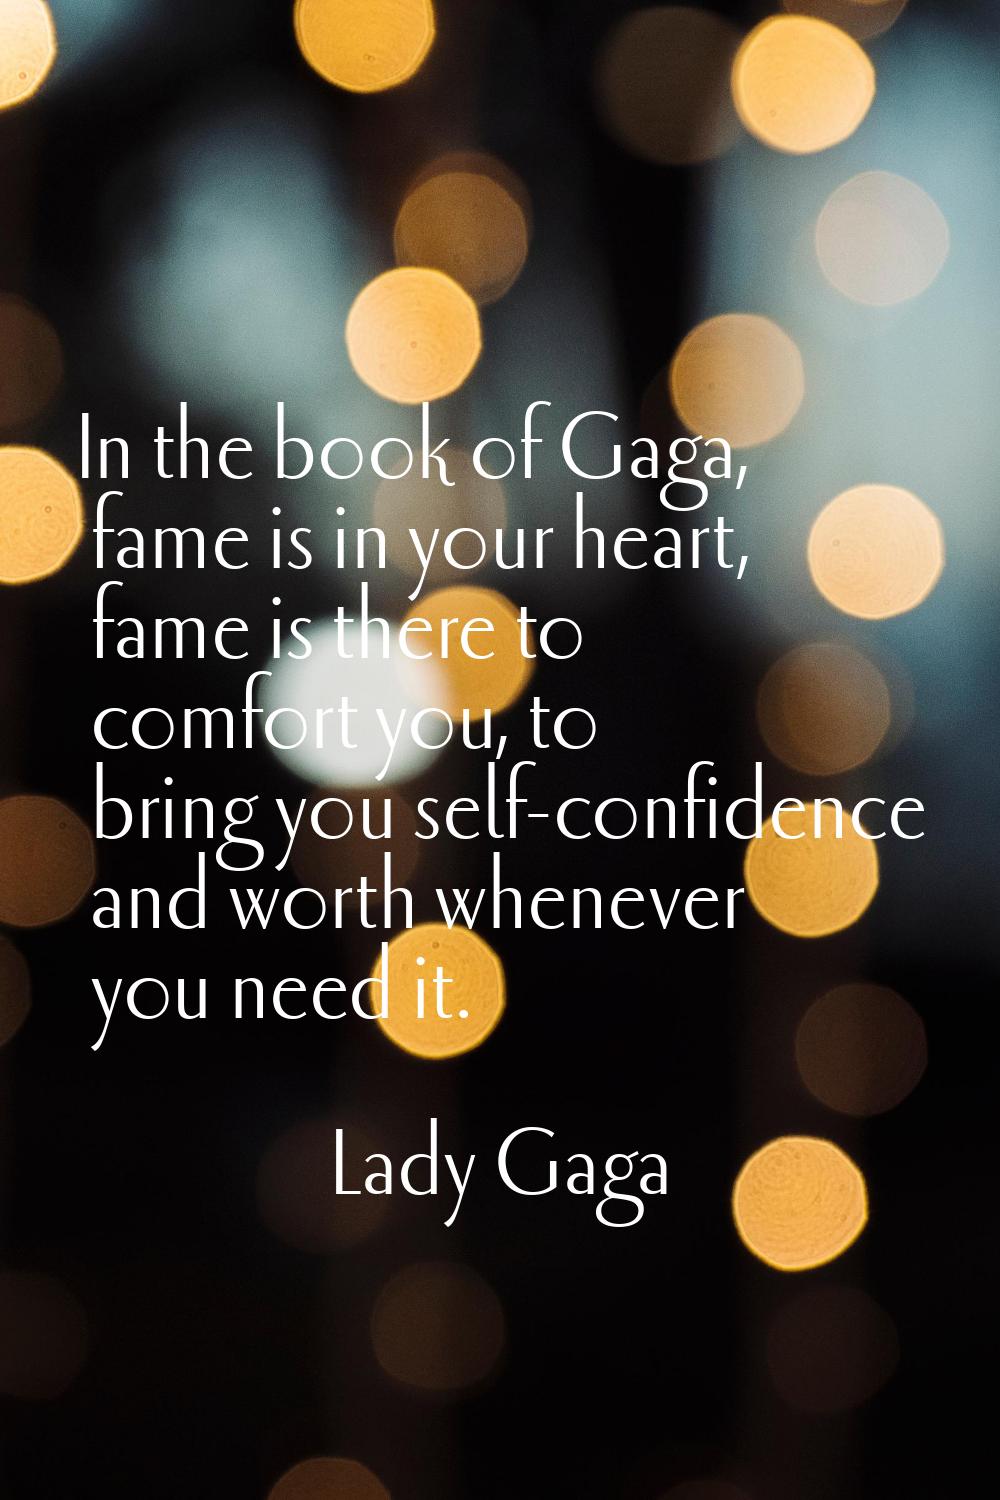 In the book of Gaga, fame is in your heart, fame is there to comfort you, to bring you self-confide